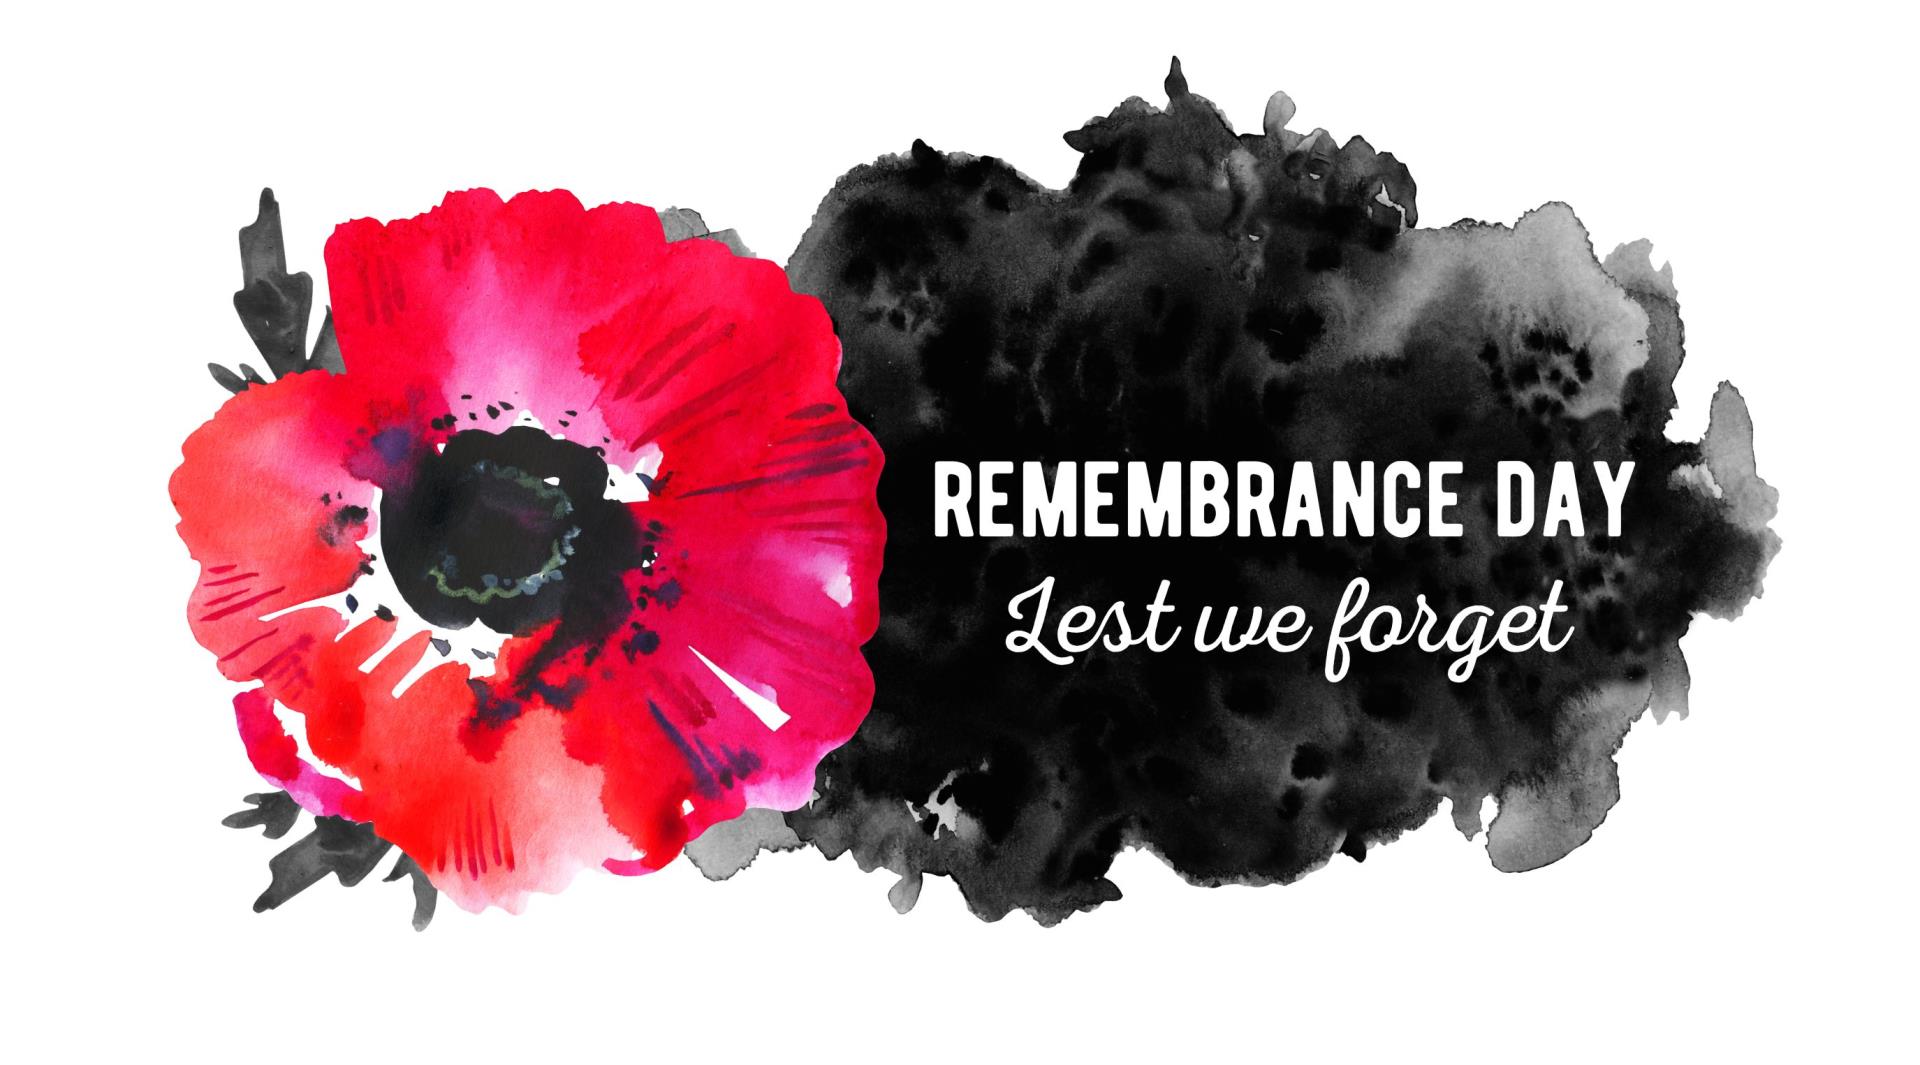 Katherine to honour Remembrance Day